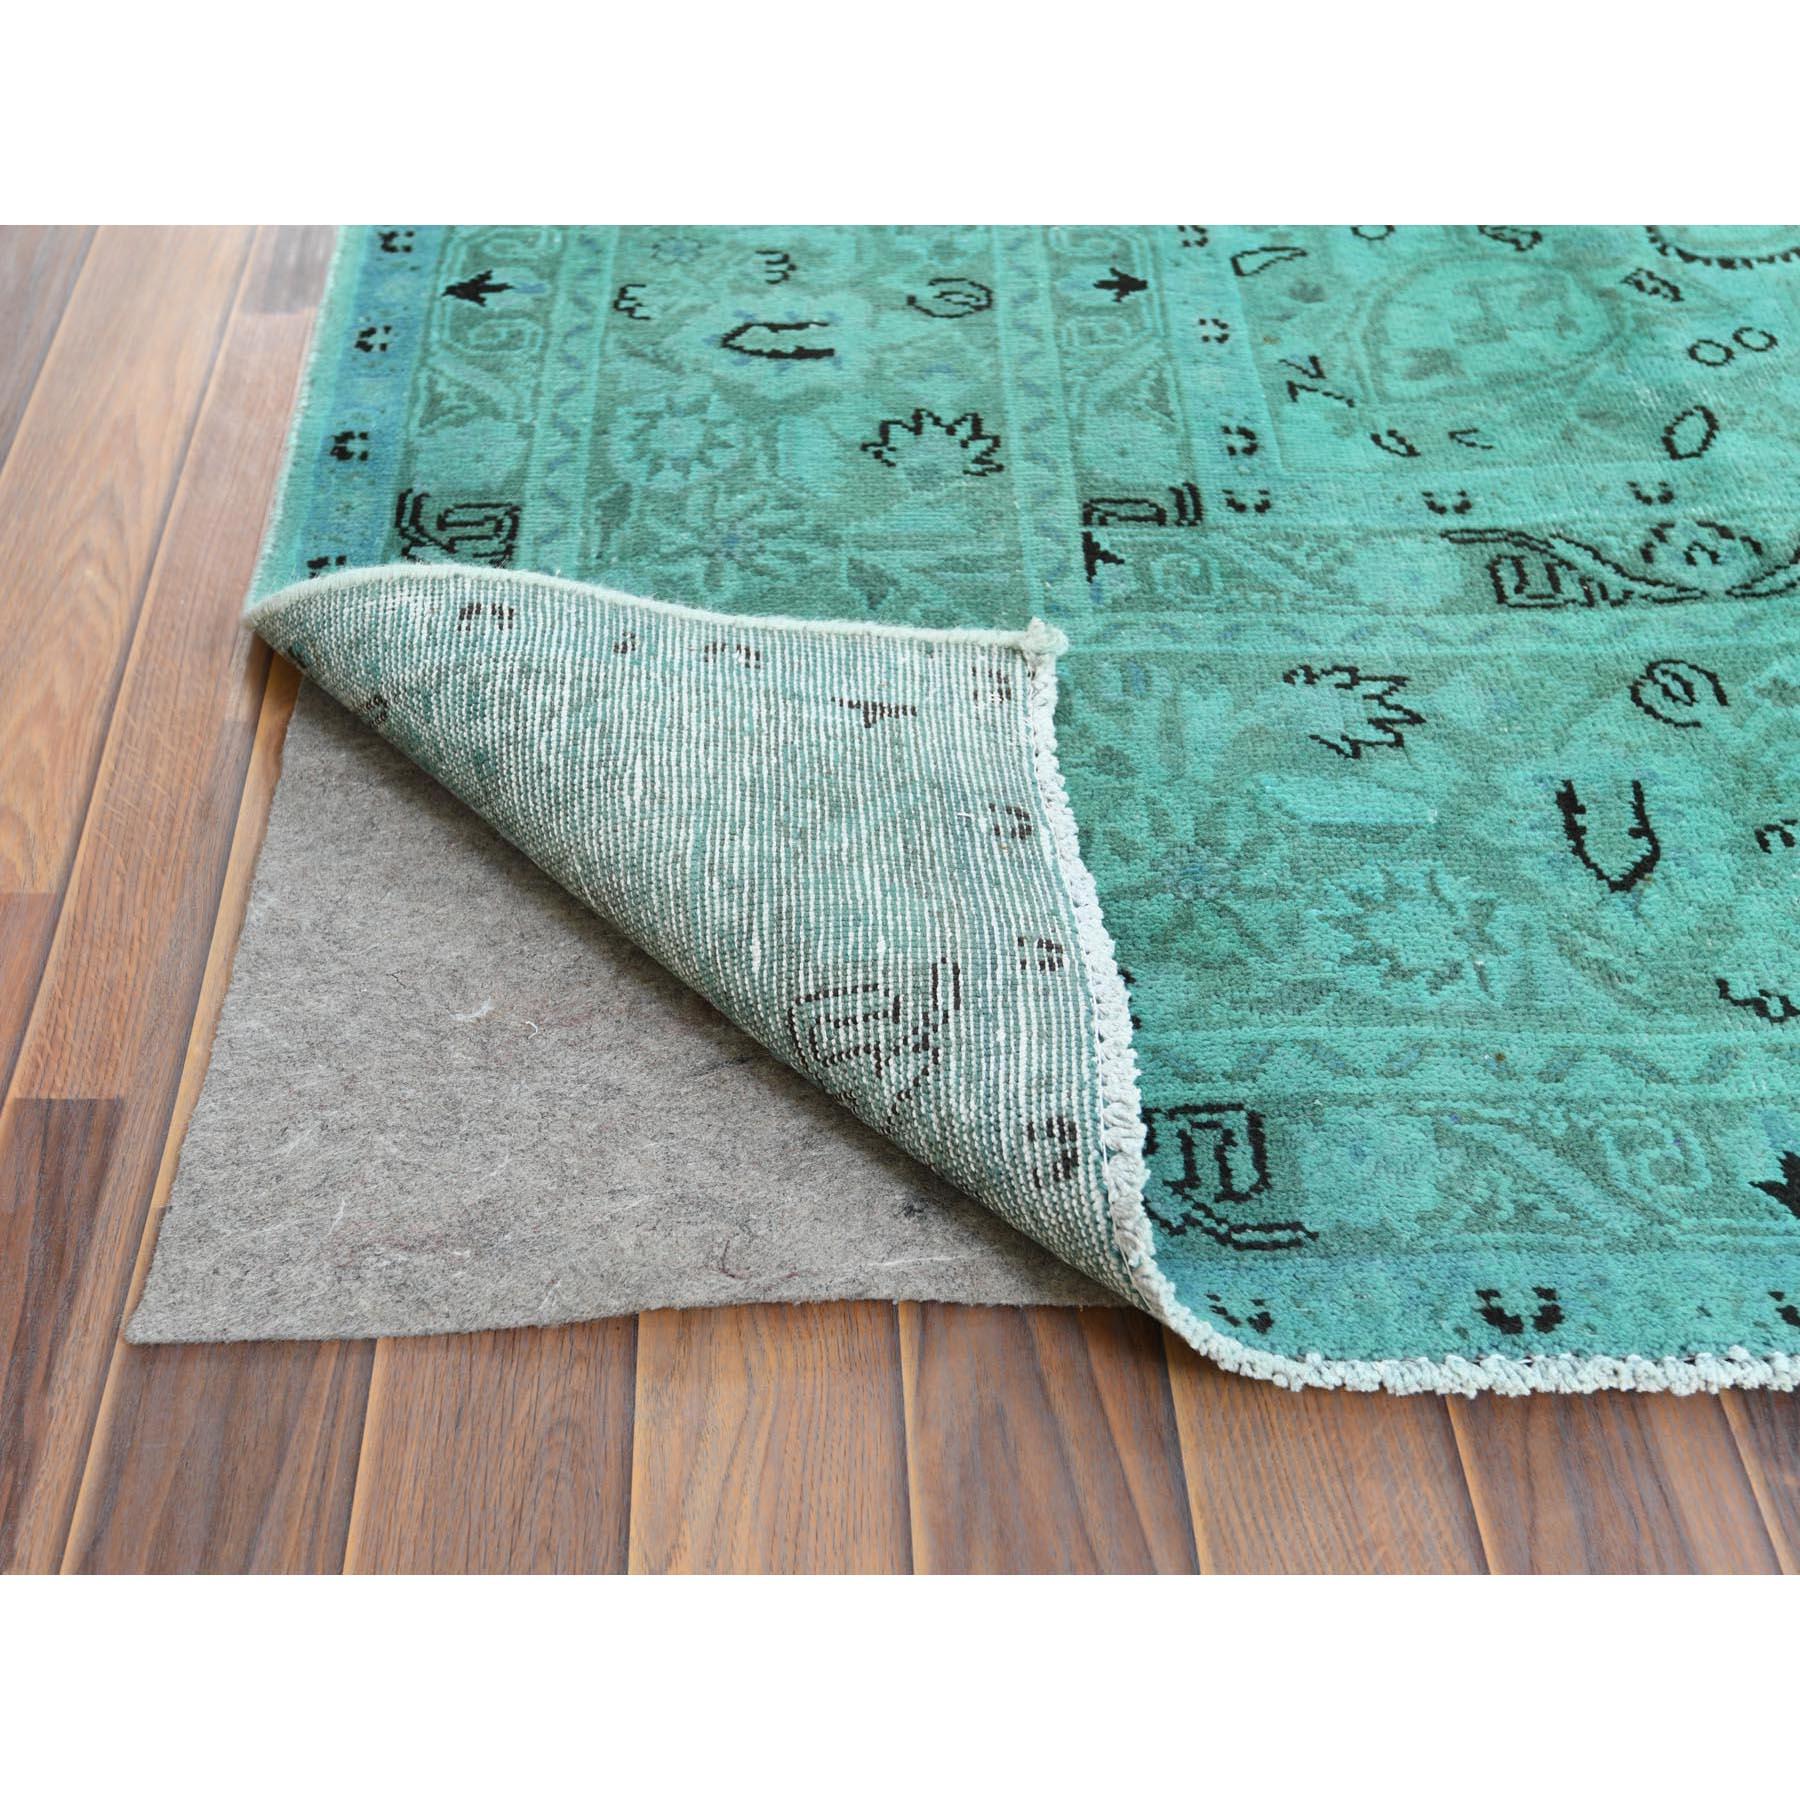 Mid-20th Century Hand Knotted Teal Green Vintage Overdyed Persian Tabriz Distressed Worn Wool Rug